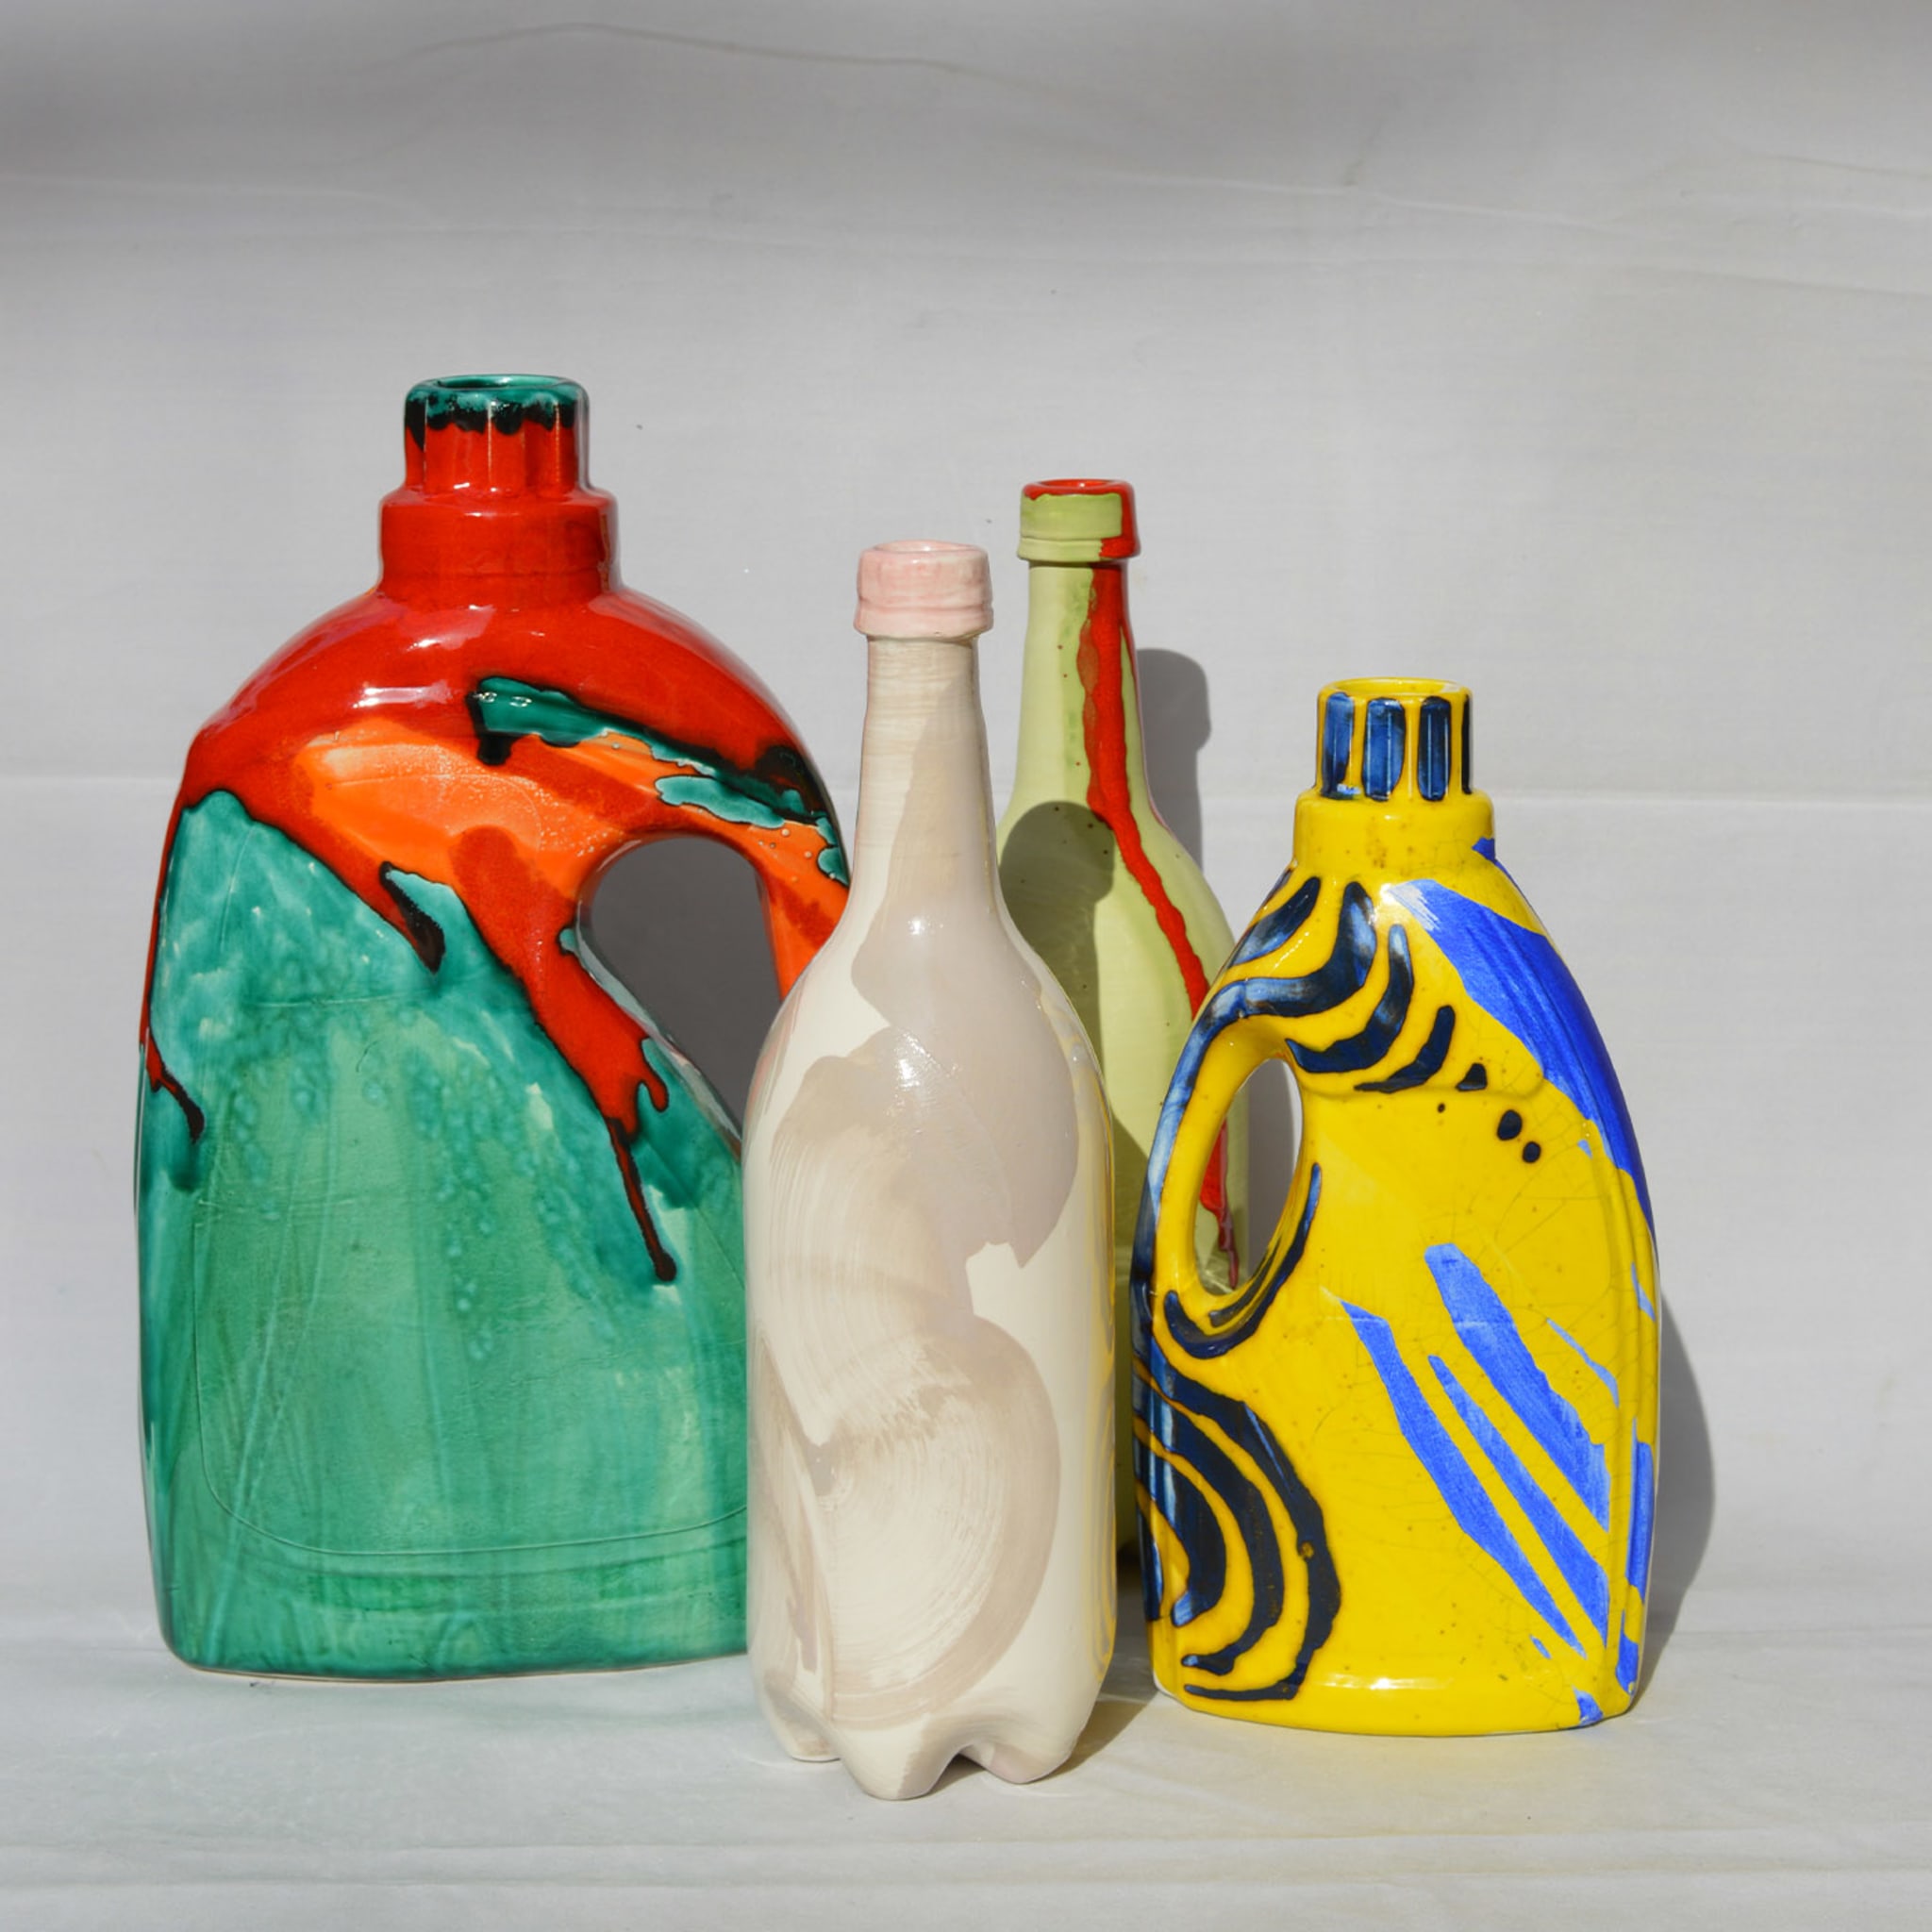 More Clay Less Plastic Green and Red Bottle - Alternative view 3